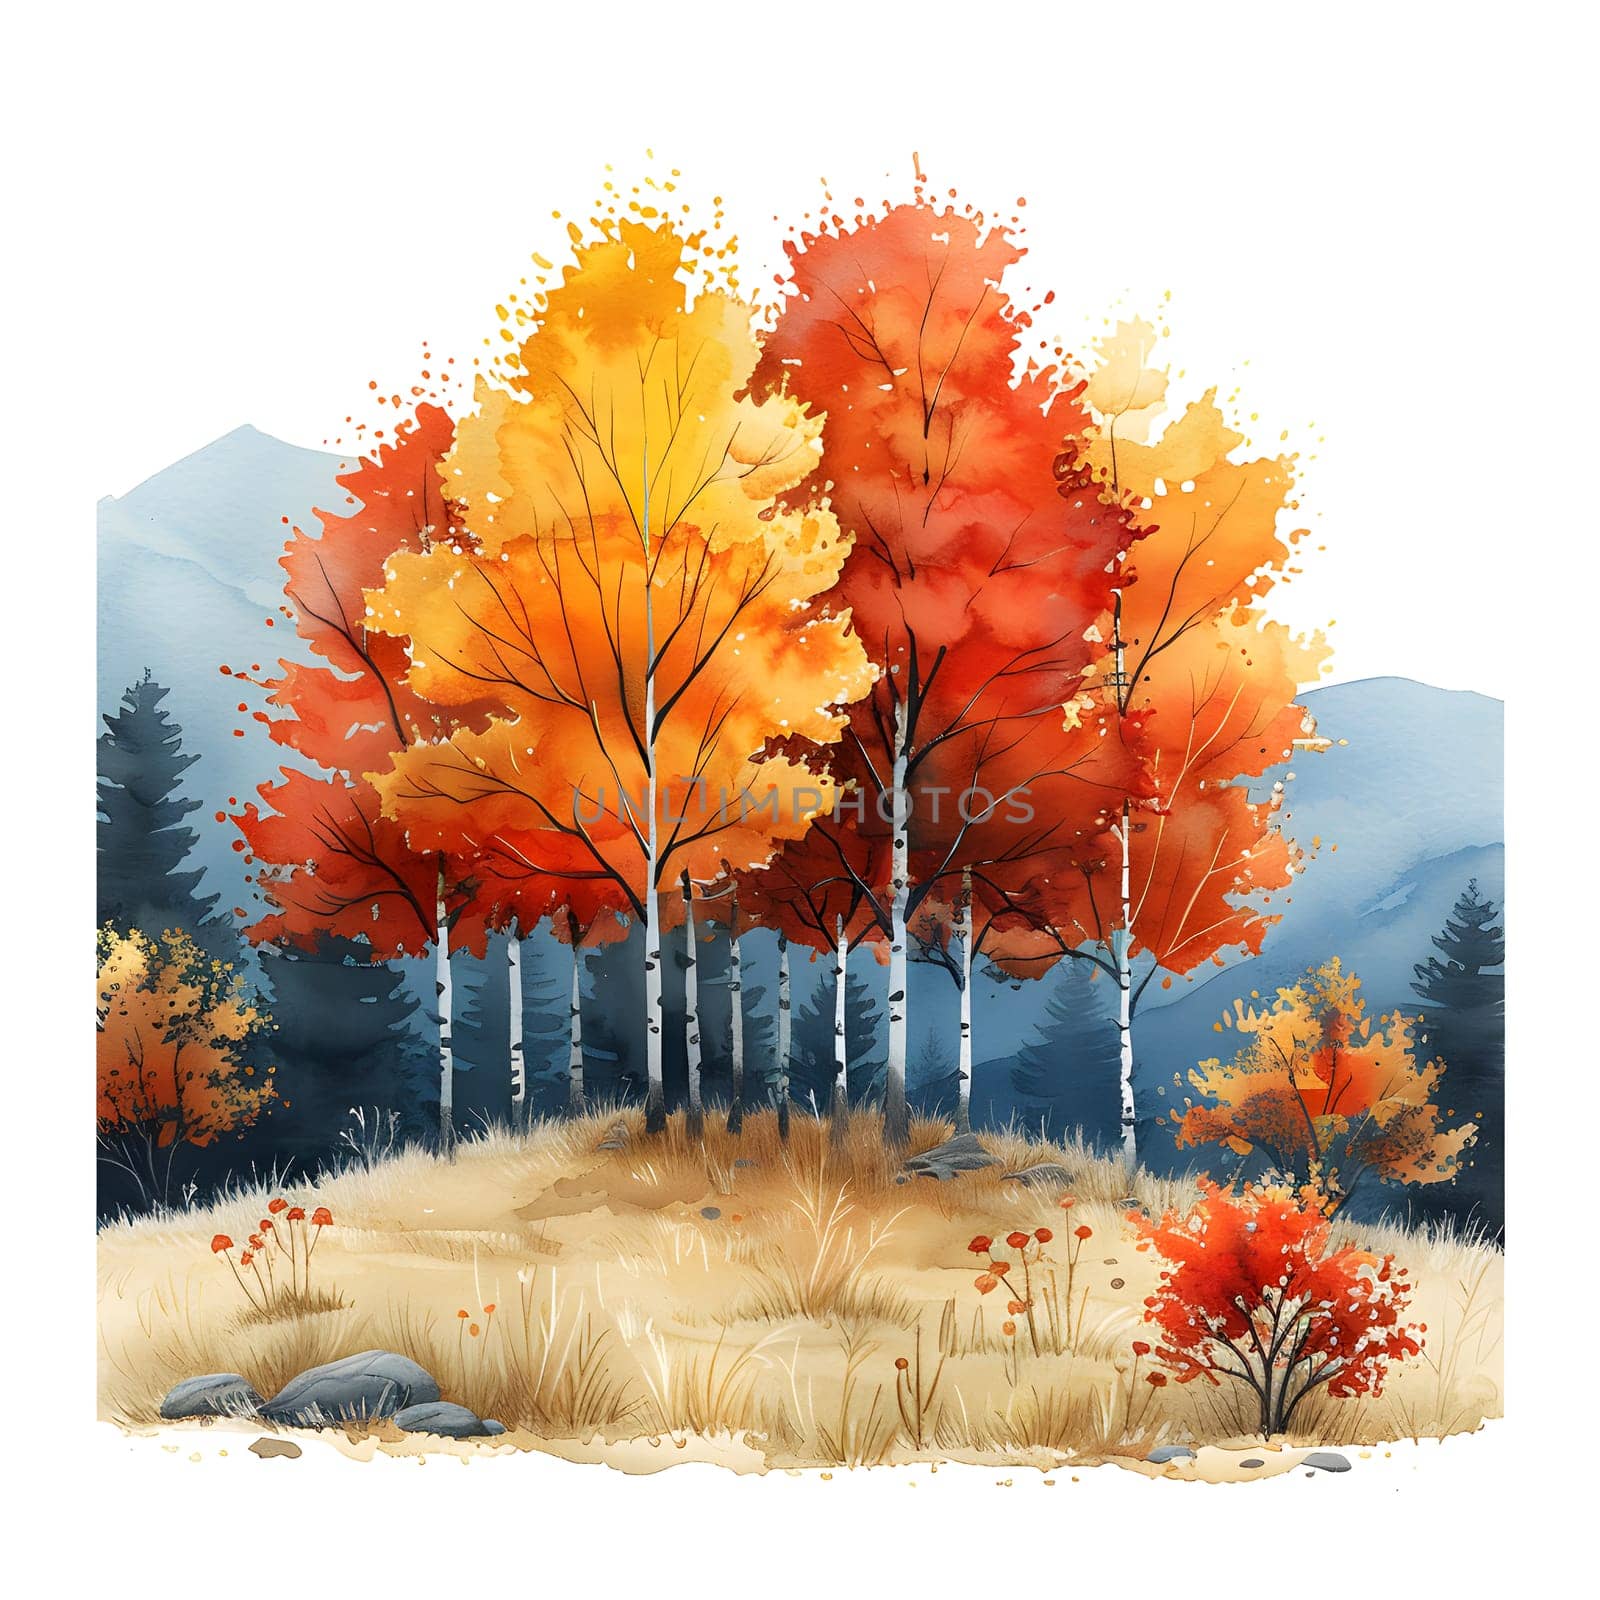 An art piece depicting a row of trees with vibrant red and yellow leaves against a grassy landscape, showcasing natures beauty in a creative way